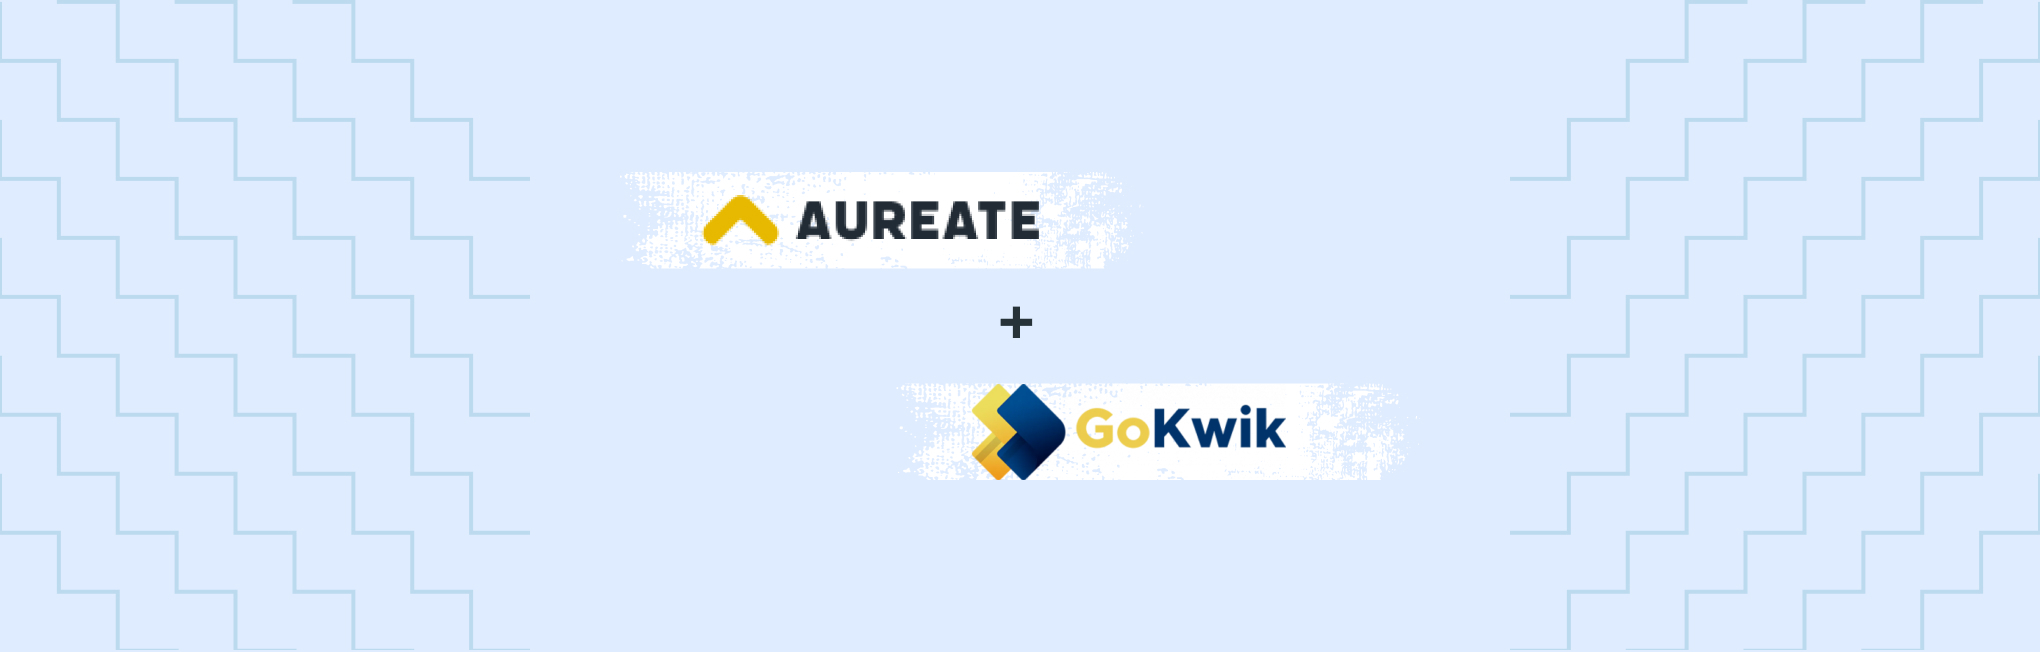 Aureate Partners with GoKwik to Drive Conversion Growth